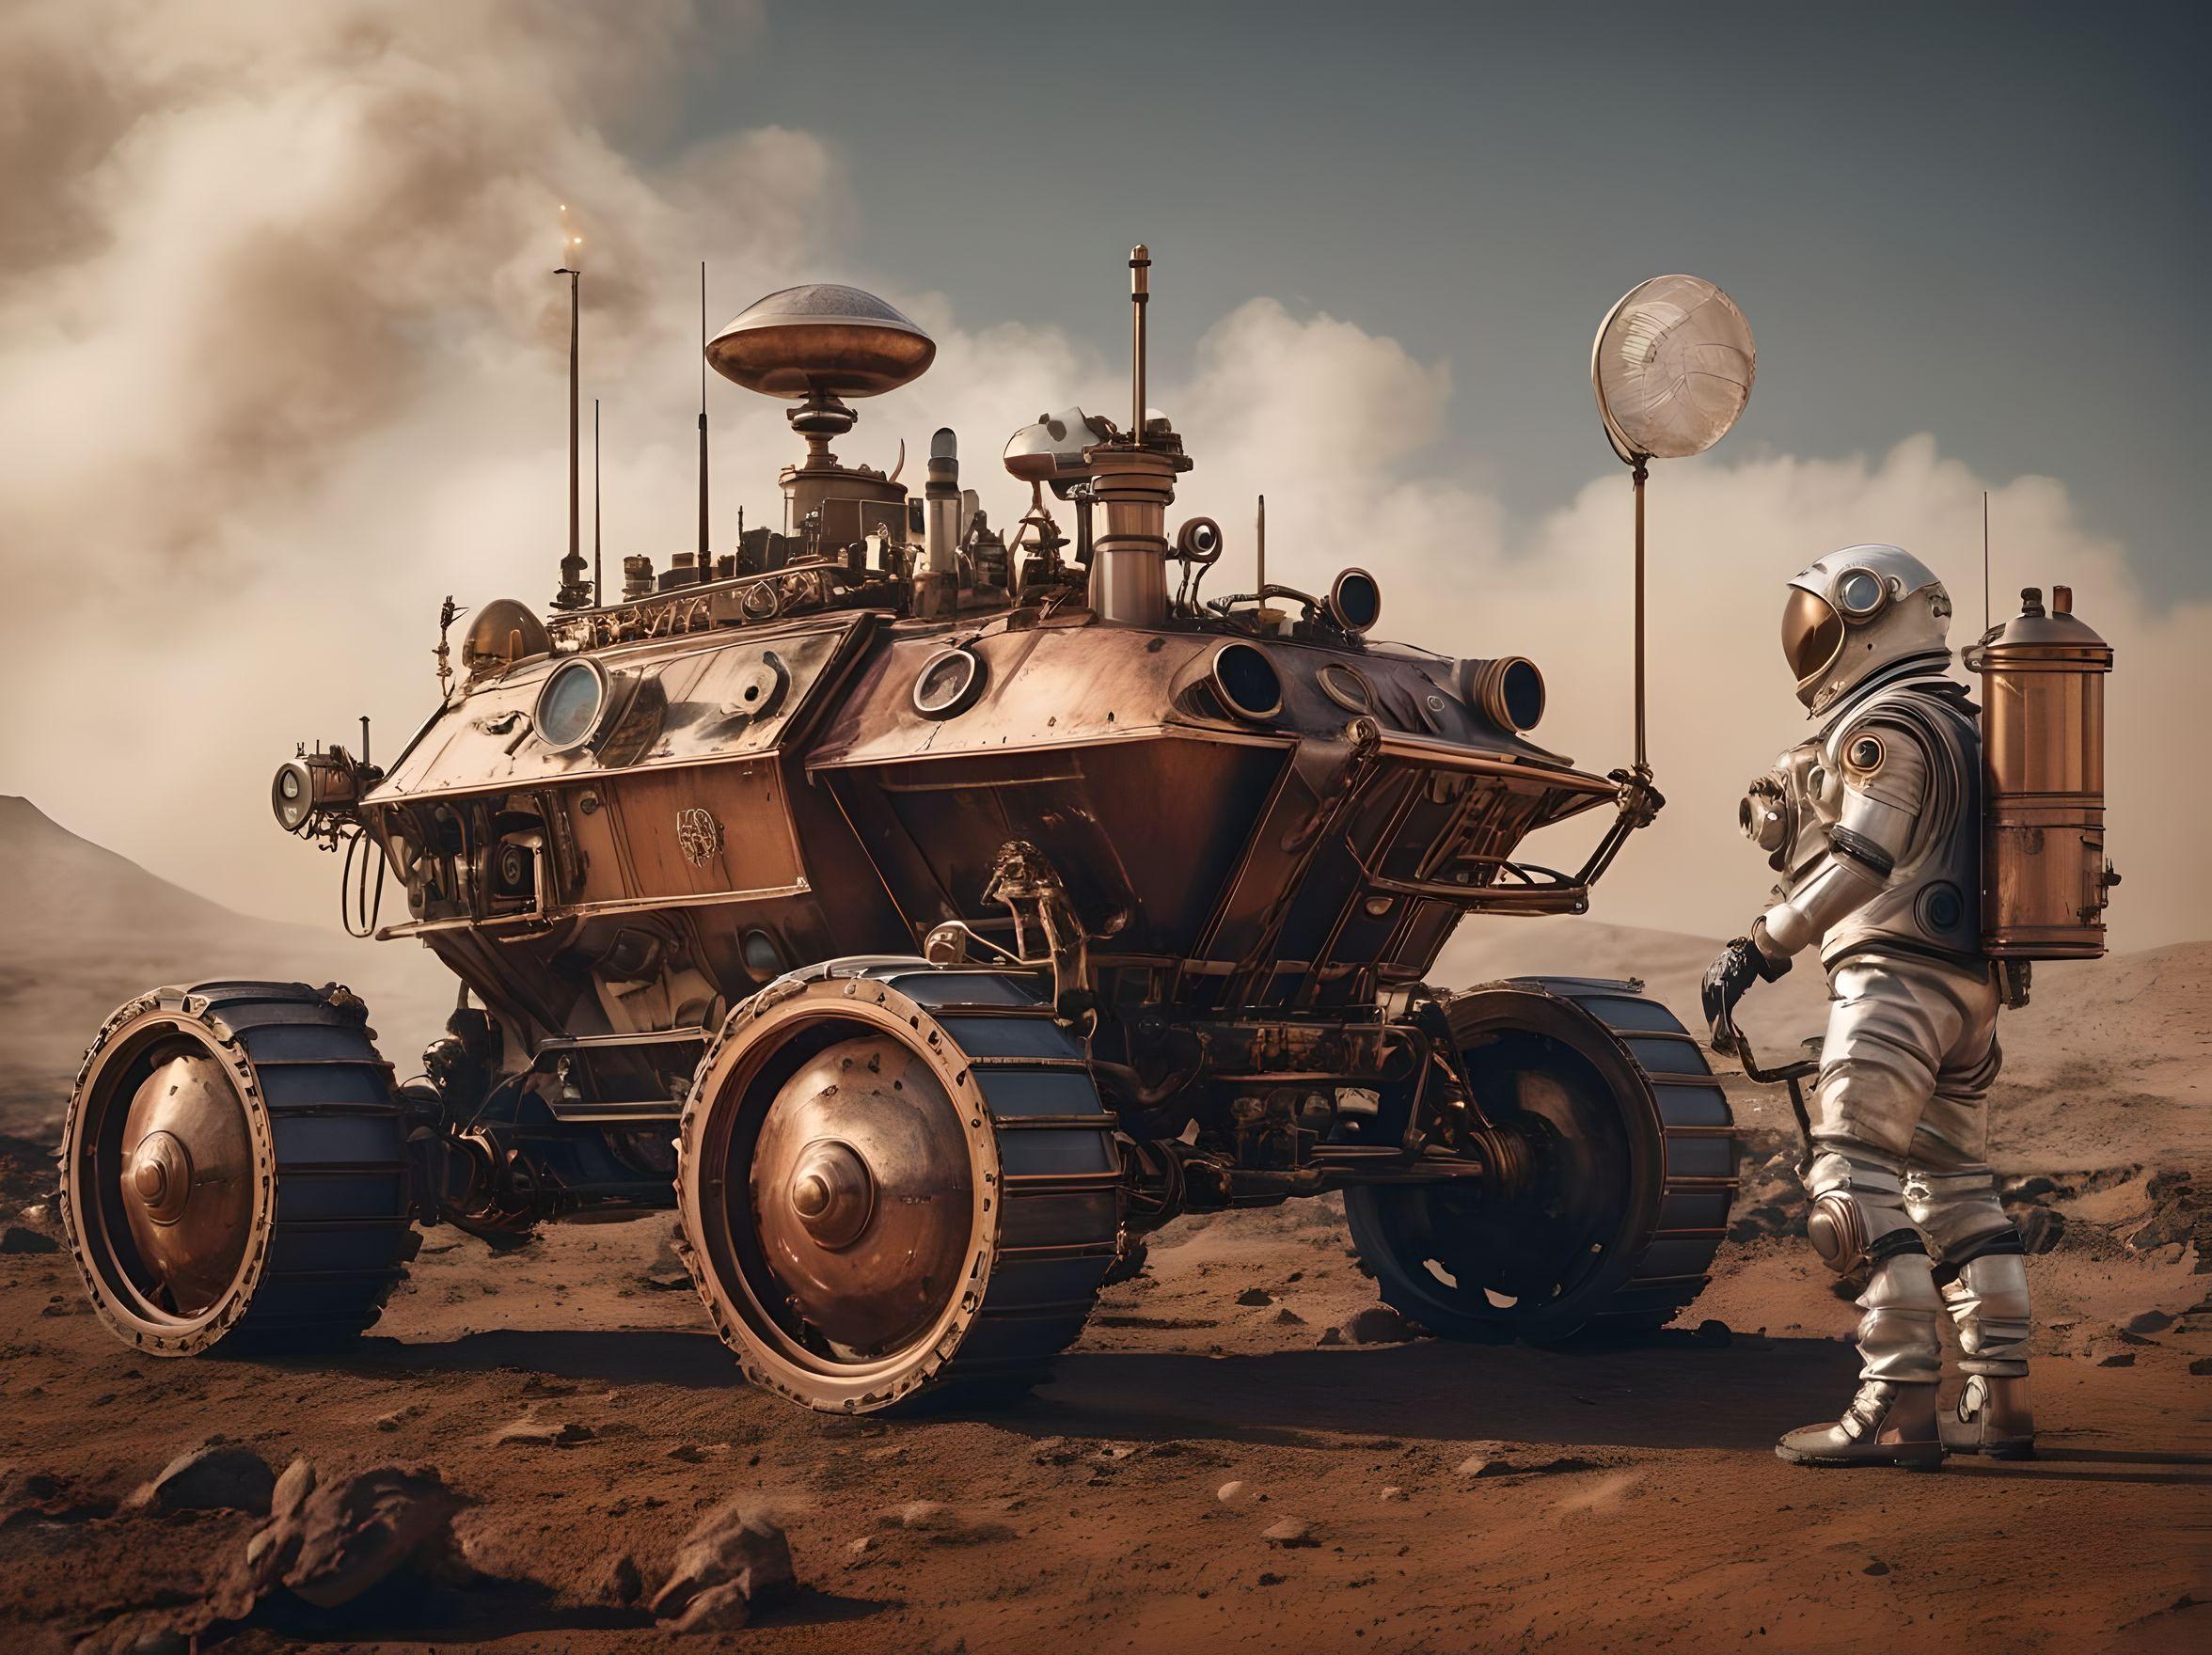 A steampunk Mars rover with rich details such as a steam engine- brass and copper metals- dusty and rusty features- and wavy smoke on its chimney. A high-resolution image with good lighting. With a steampunk astronaut standing on the side
